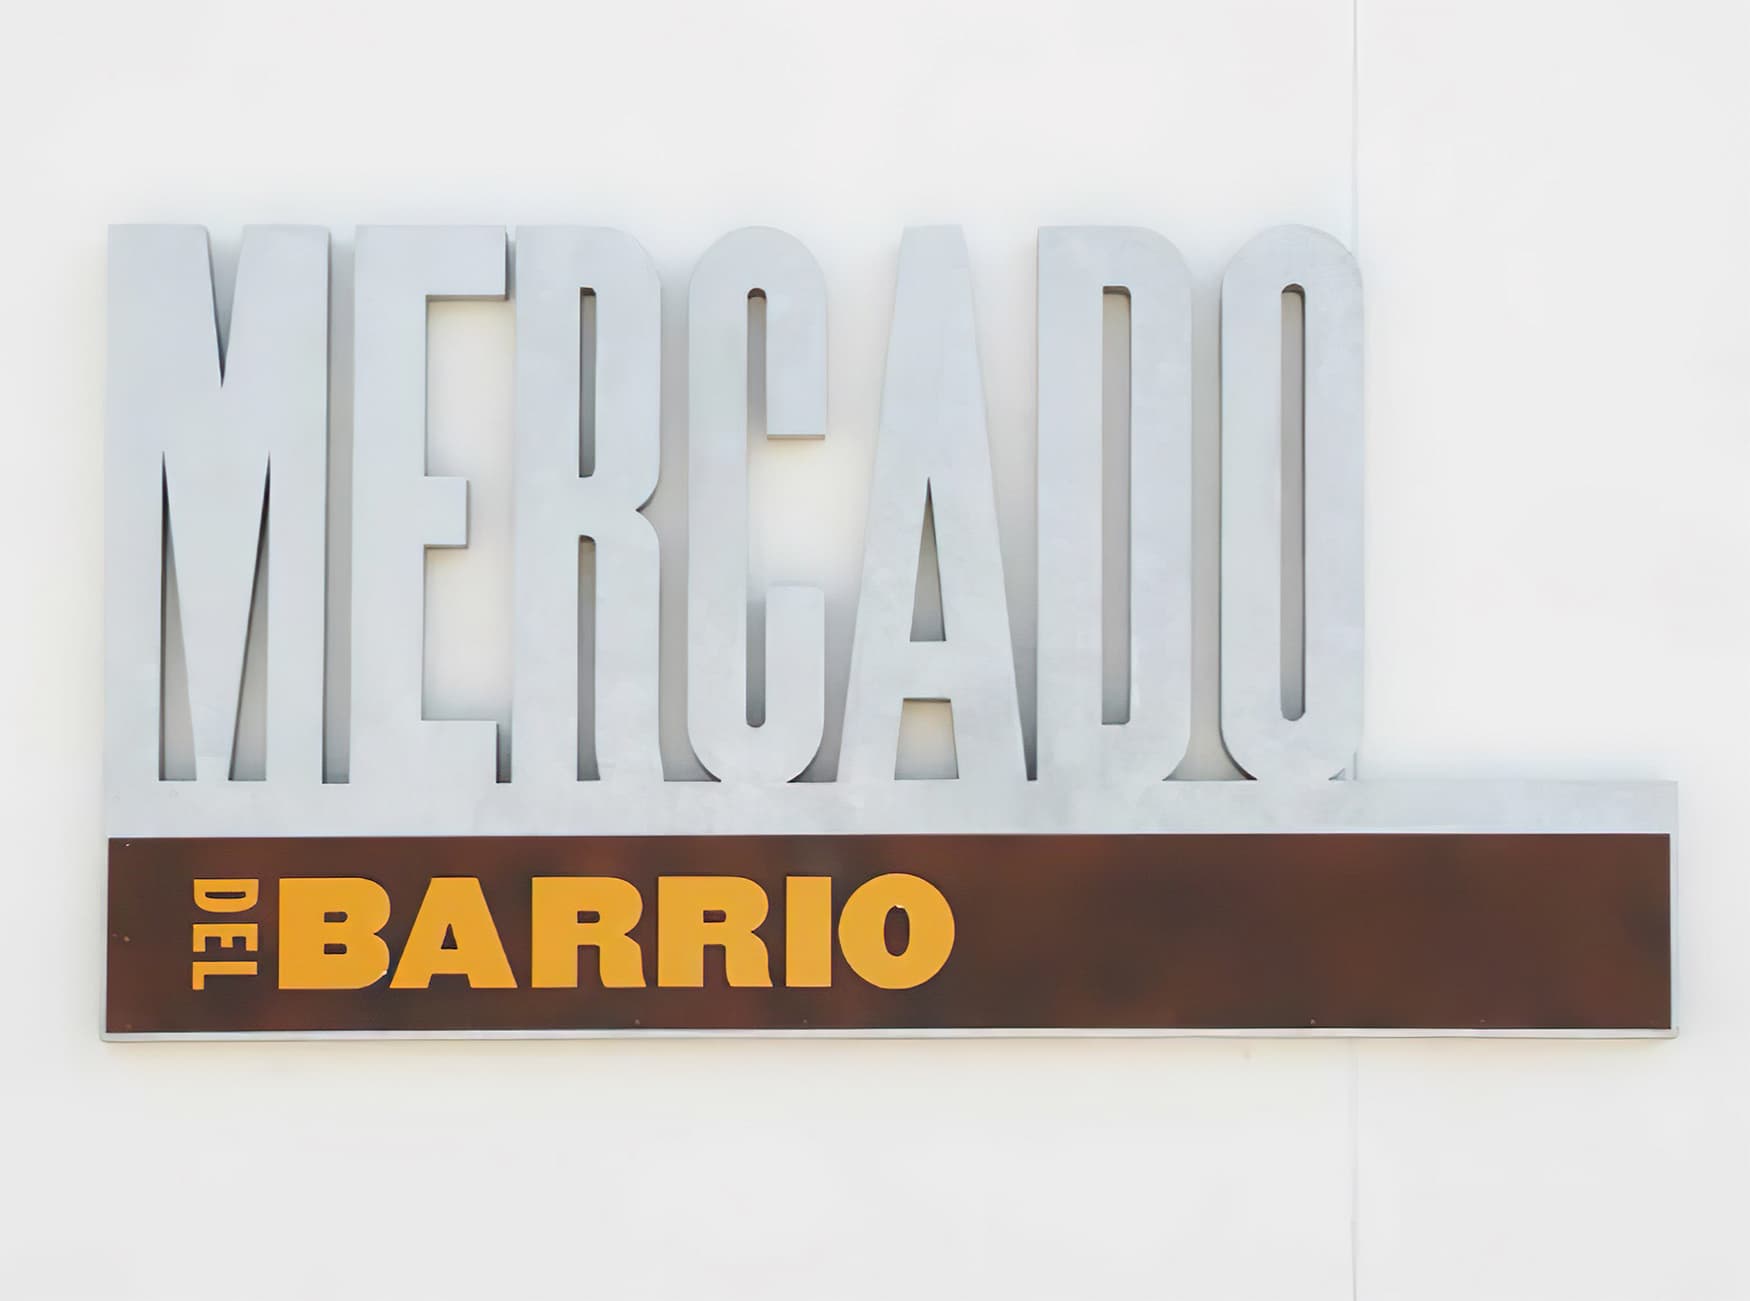 RSM Design worked with Shea Properties to prepare wayfinding signage, environmental graphics, and placemaking elements for Mercado del Barrio, a residential and commercial mixed-use development located in San Diego, California. Identity Signage.